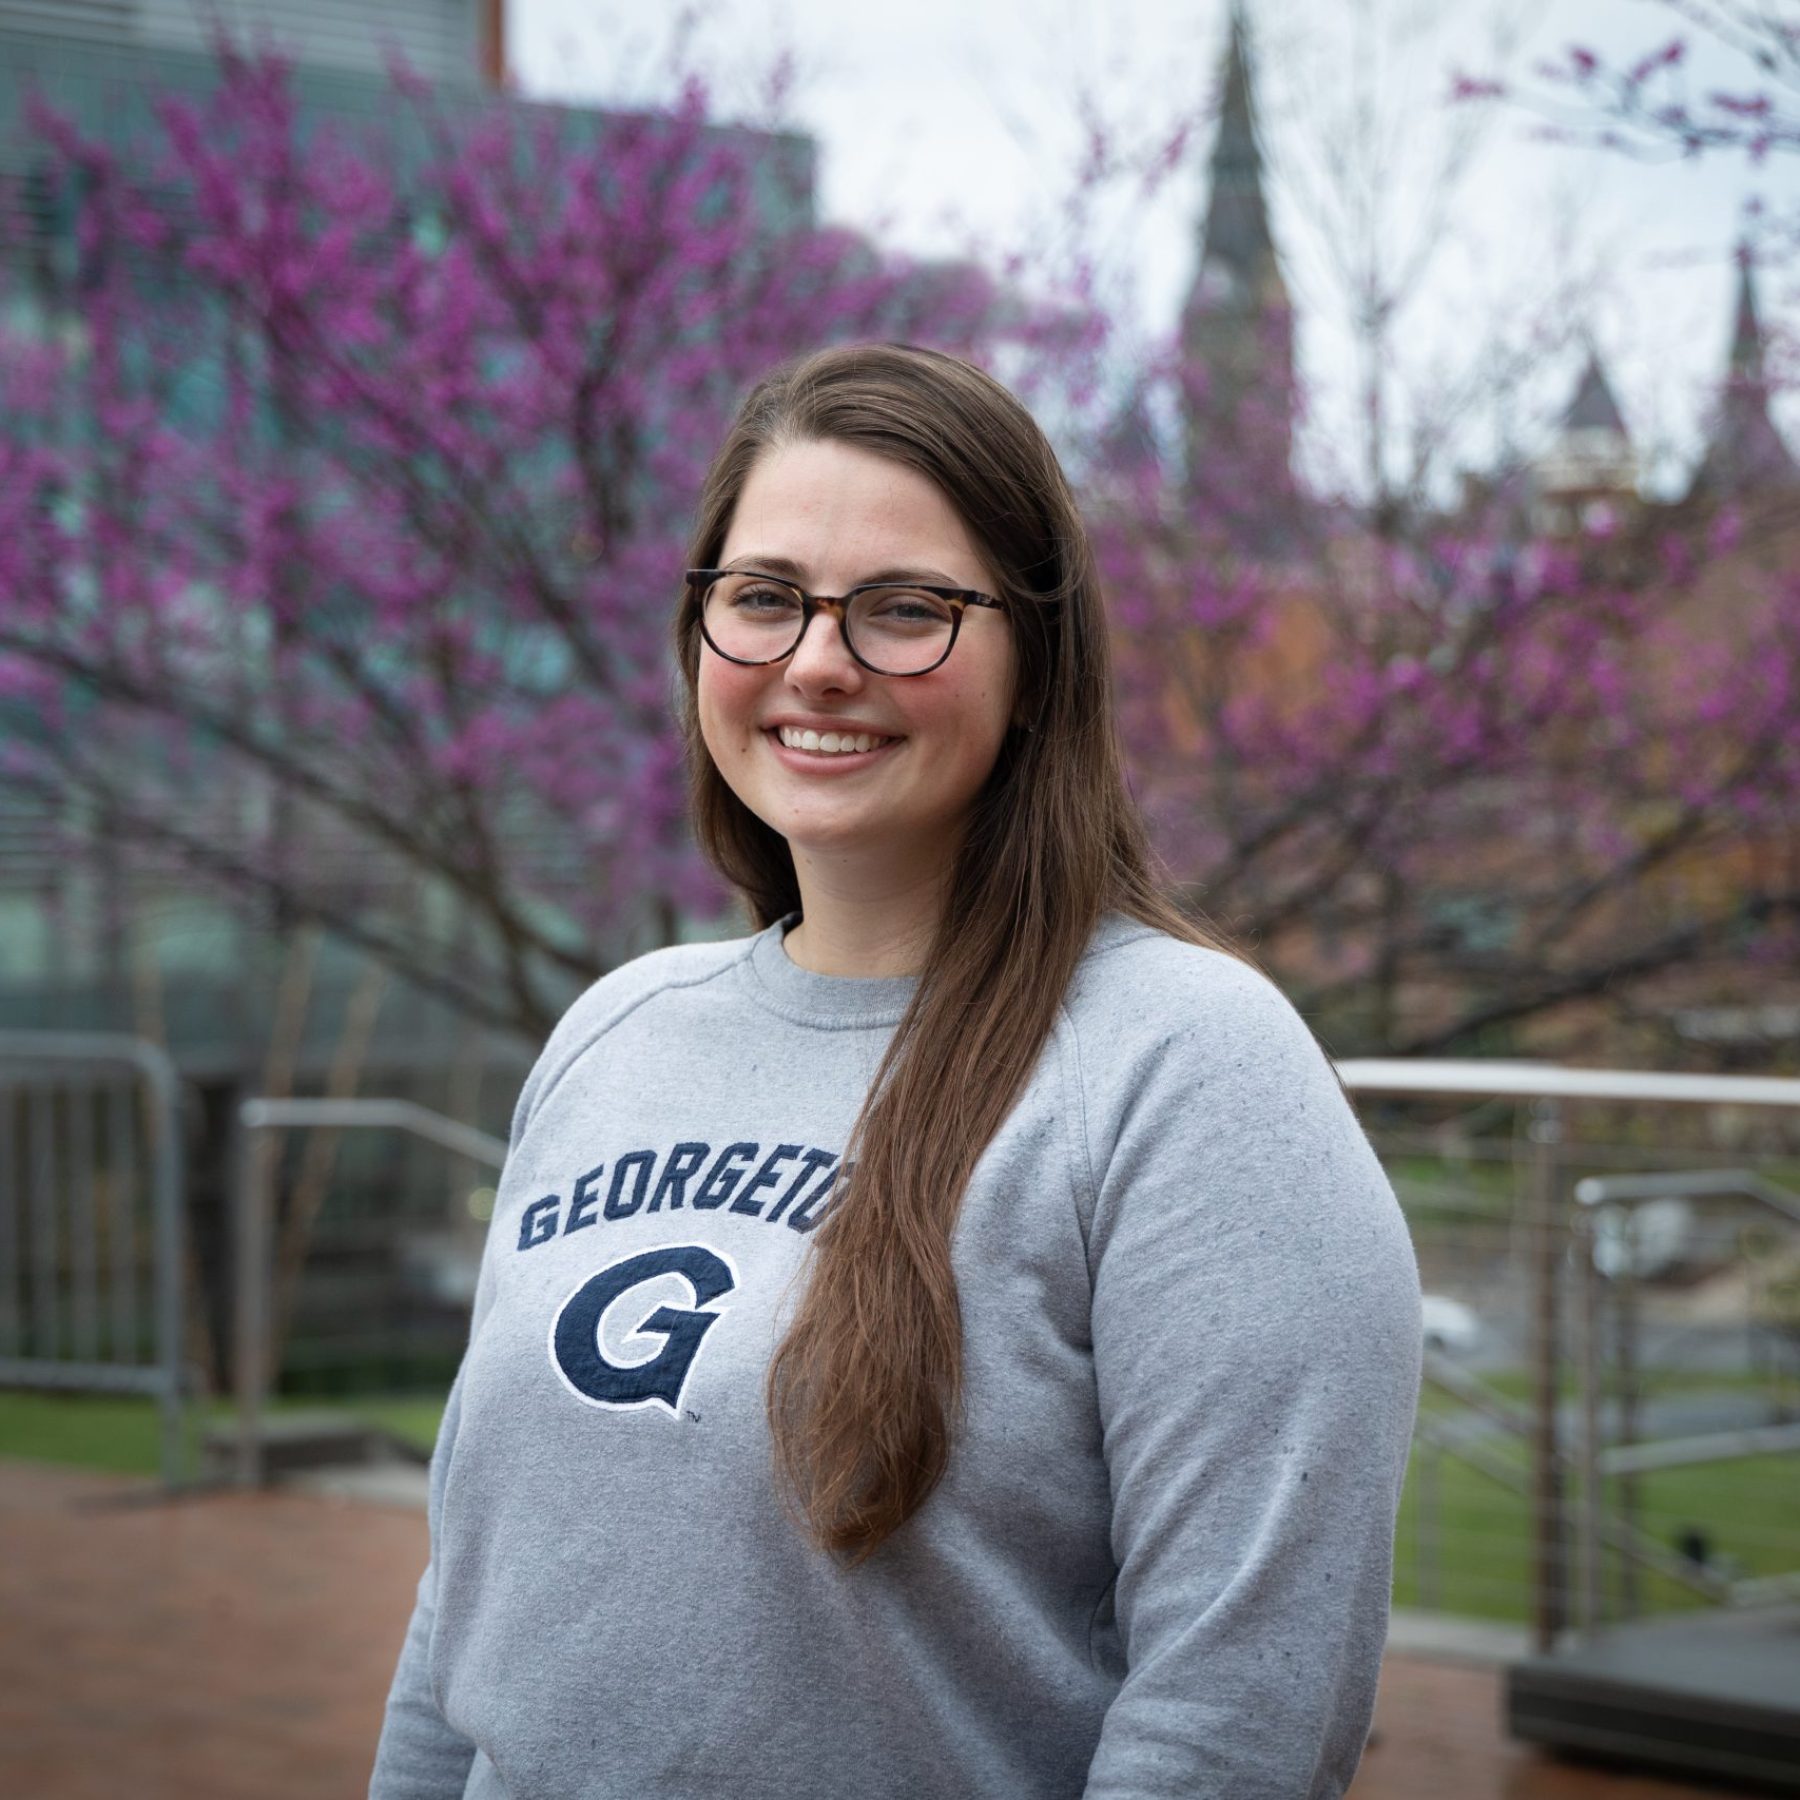 Kiki wears a gray Georgetown sweatshirt while outside in front of a blooming tree with Healy Hall in the background